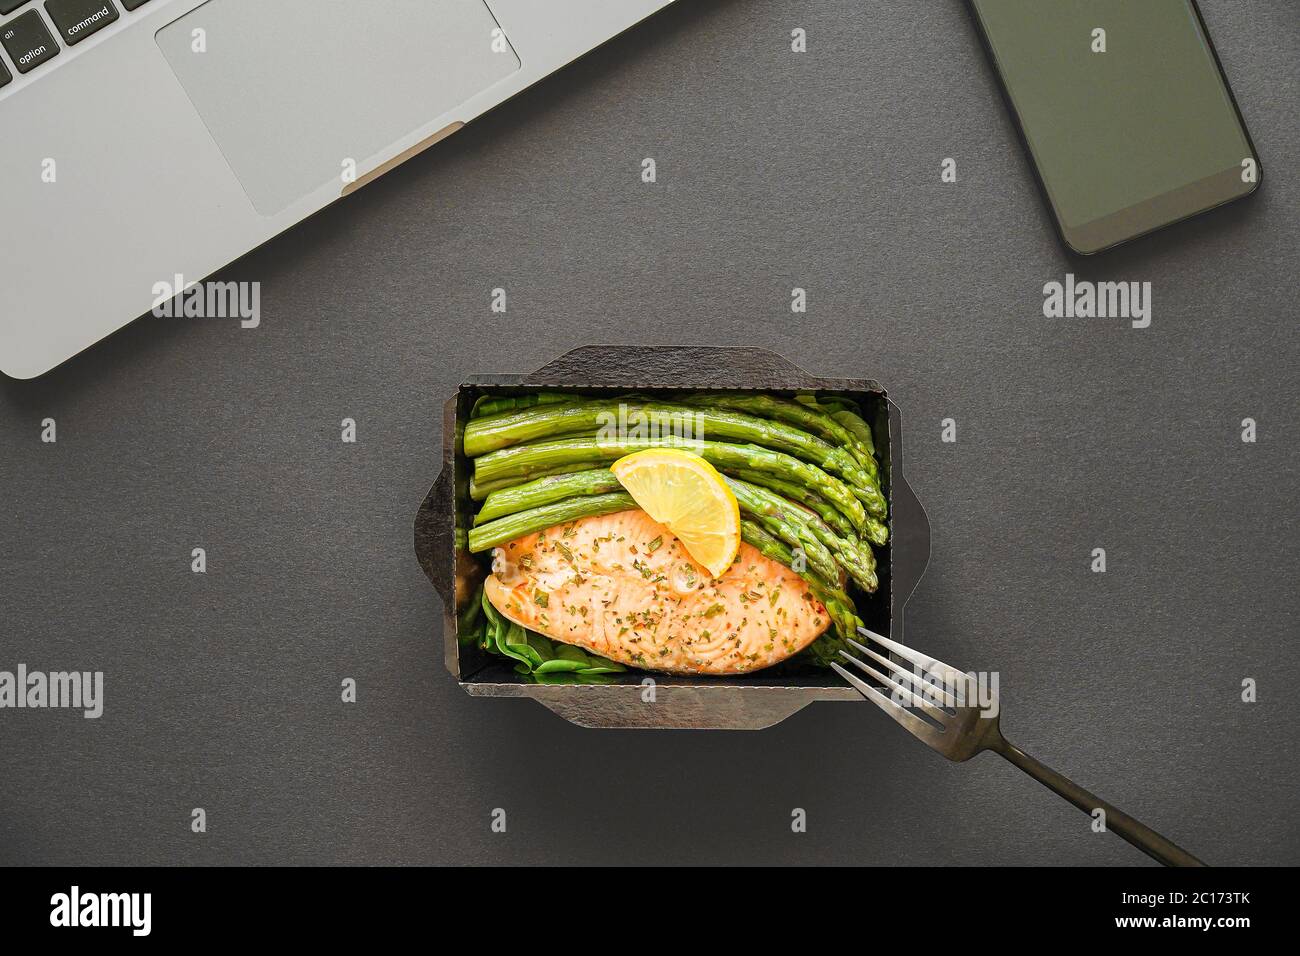 Office food delivery meal fish and vegetable lunch box at work on black table. Stock Photo